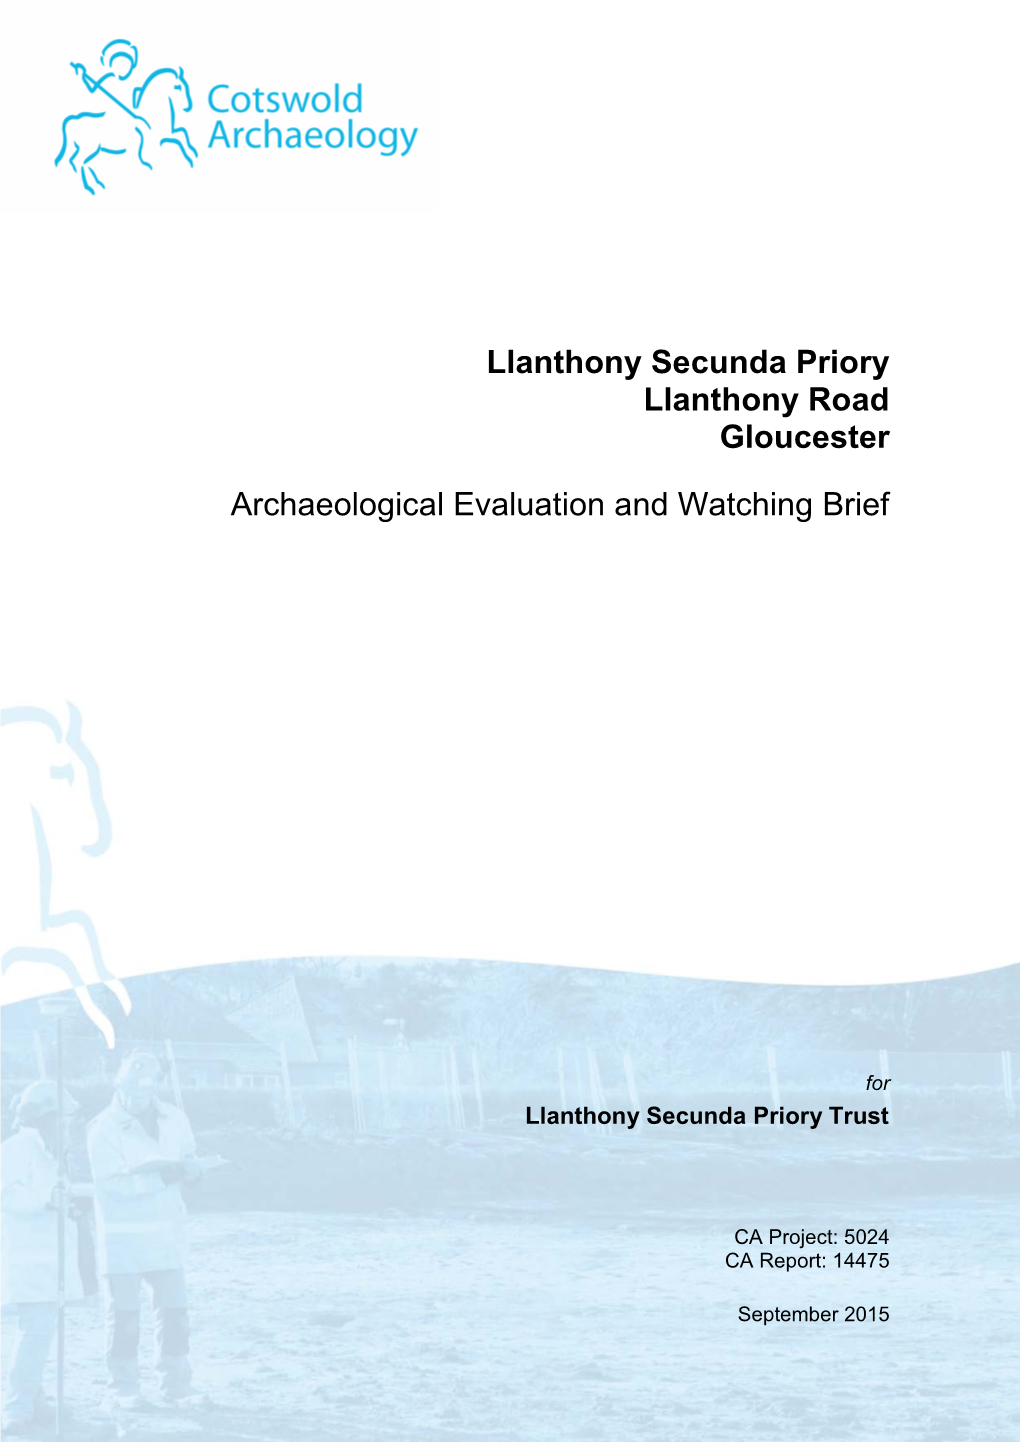 Llanthony Secunda Priory Llanthony Road Gloucester Archaeological Evaluation and Watching Brief